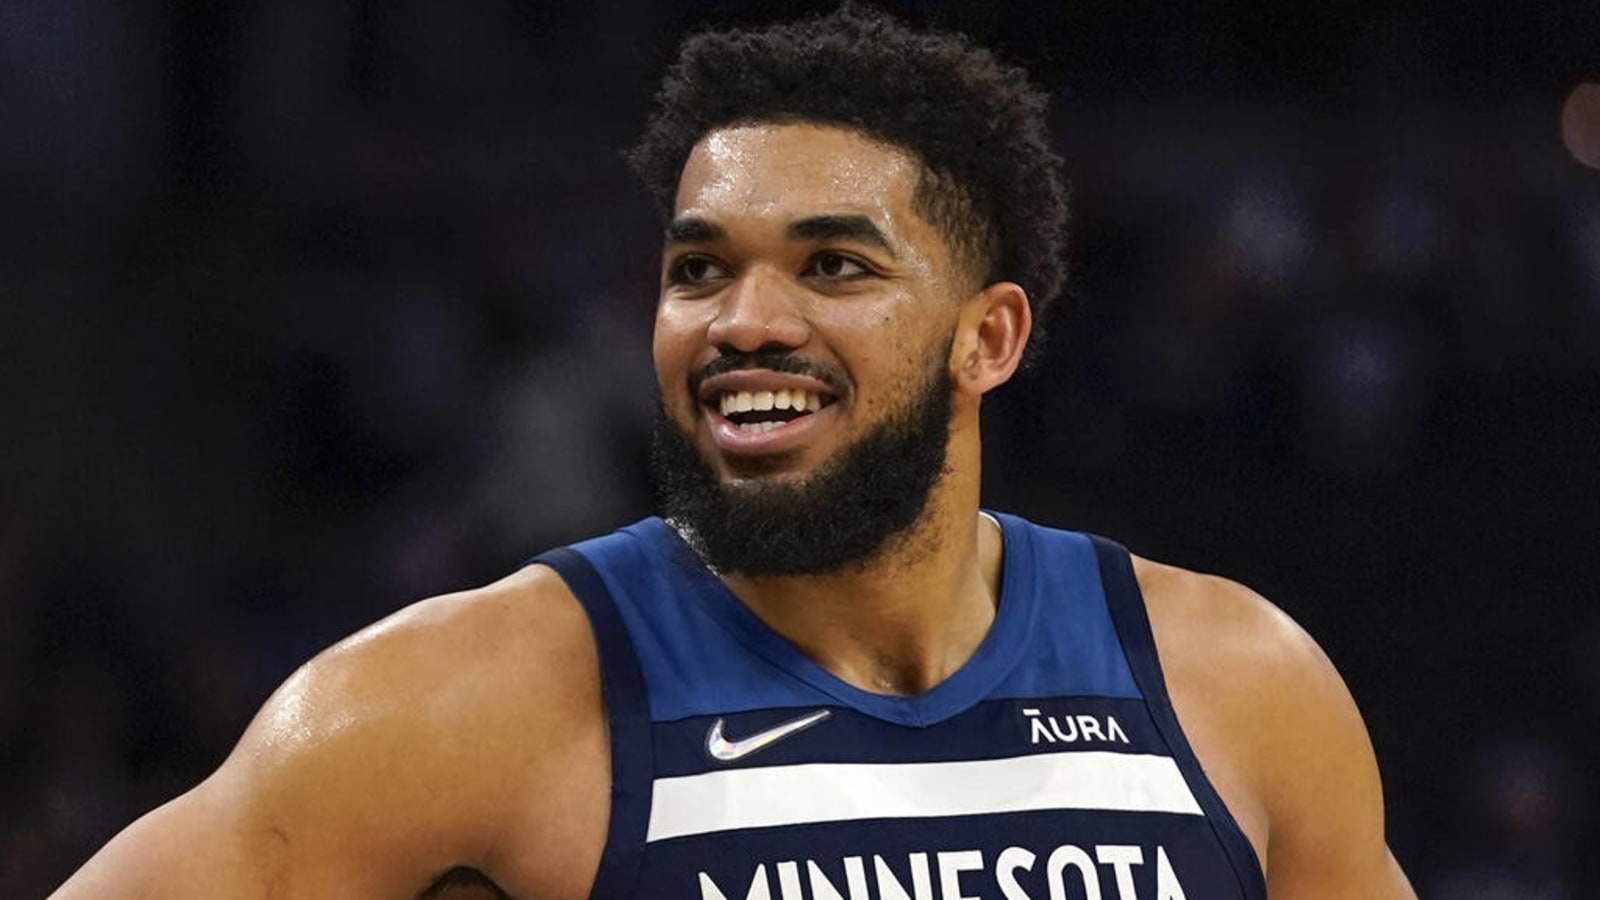 Karl-Anthony Towns, Jayson Tatum named Players of the Week